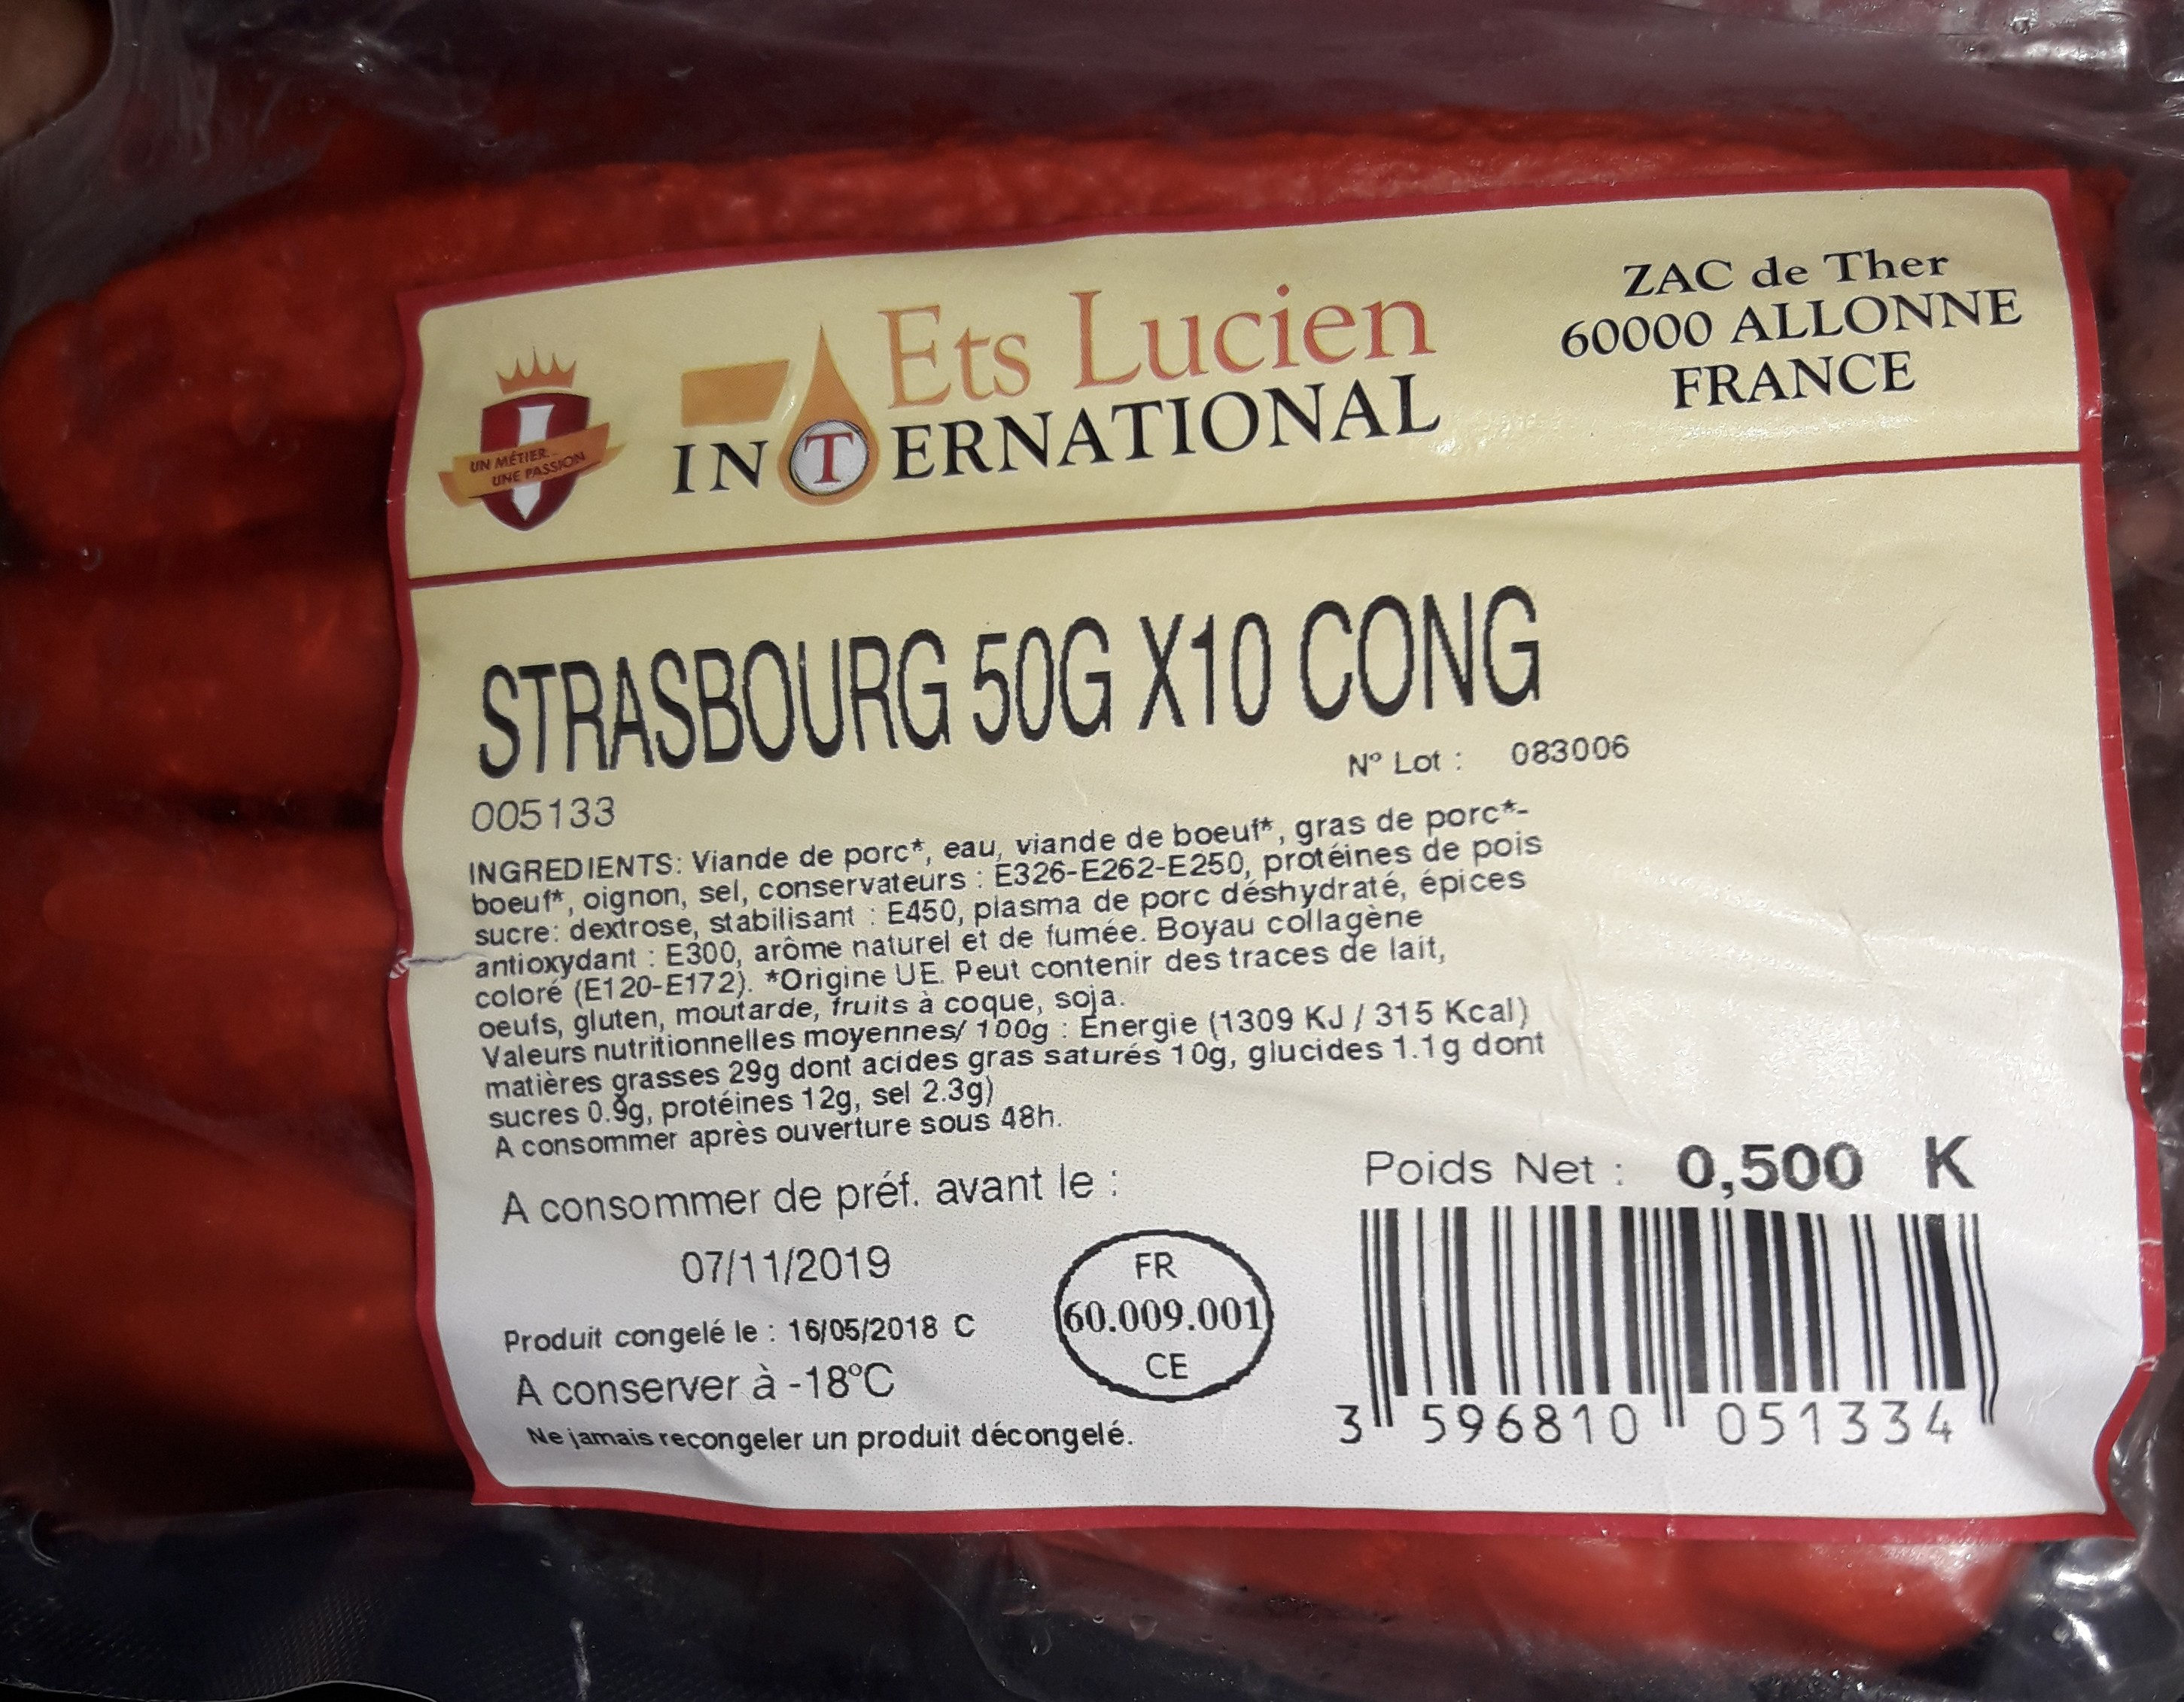 Strasbourg 500g x 10 cong - Product - fr